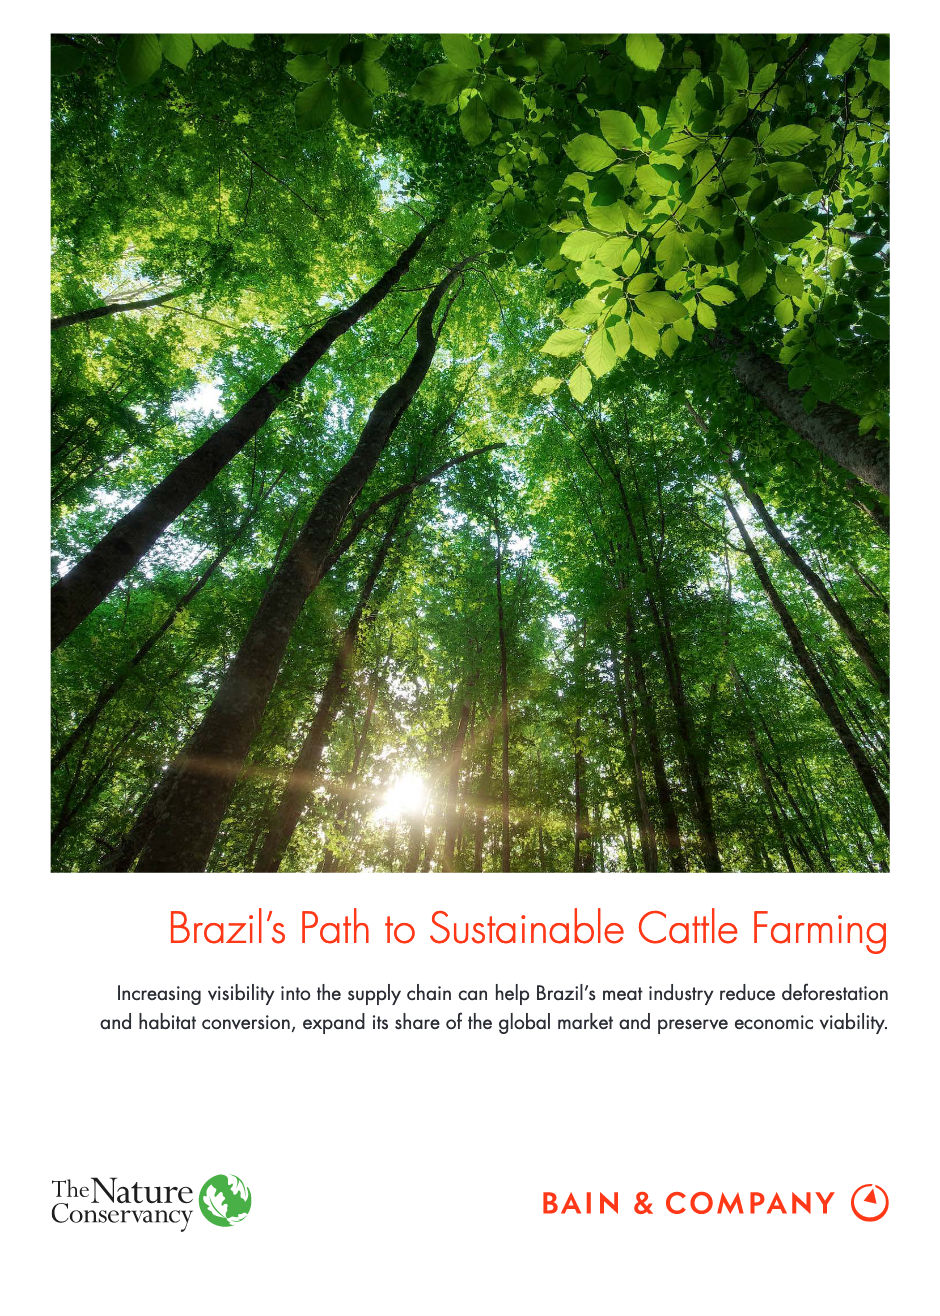  Brazil's Path to Sustainable Cattle Farming